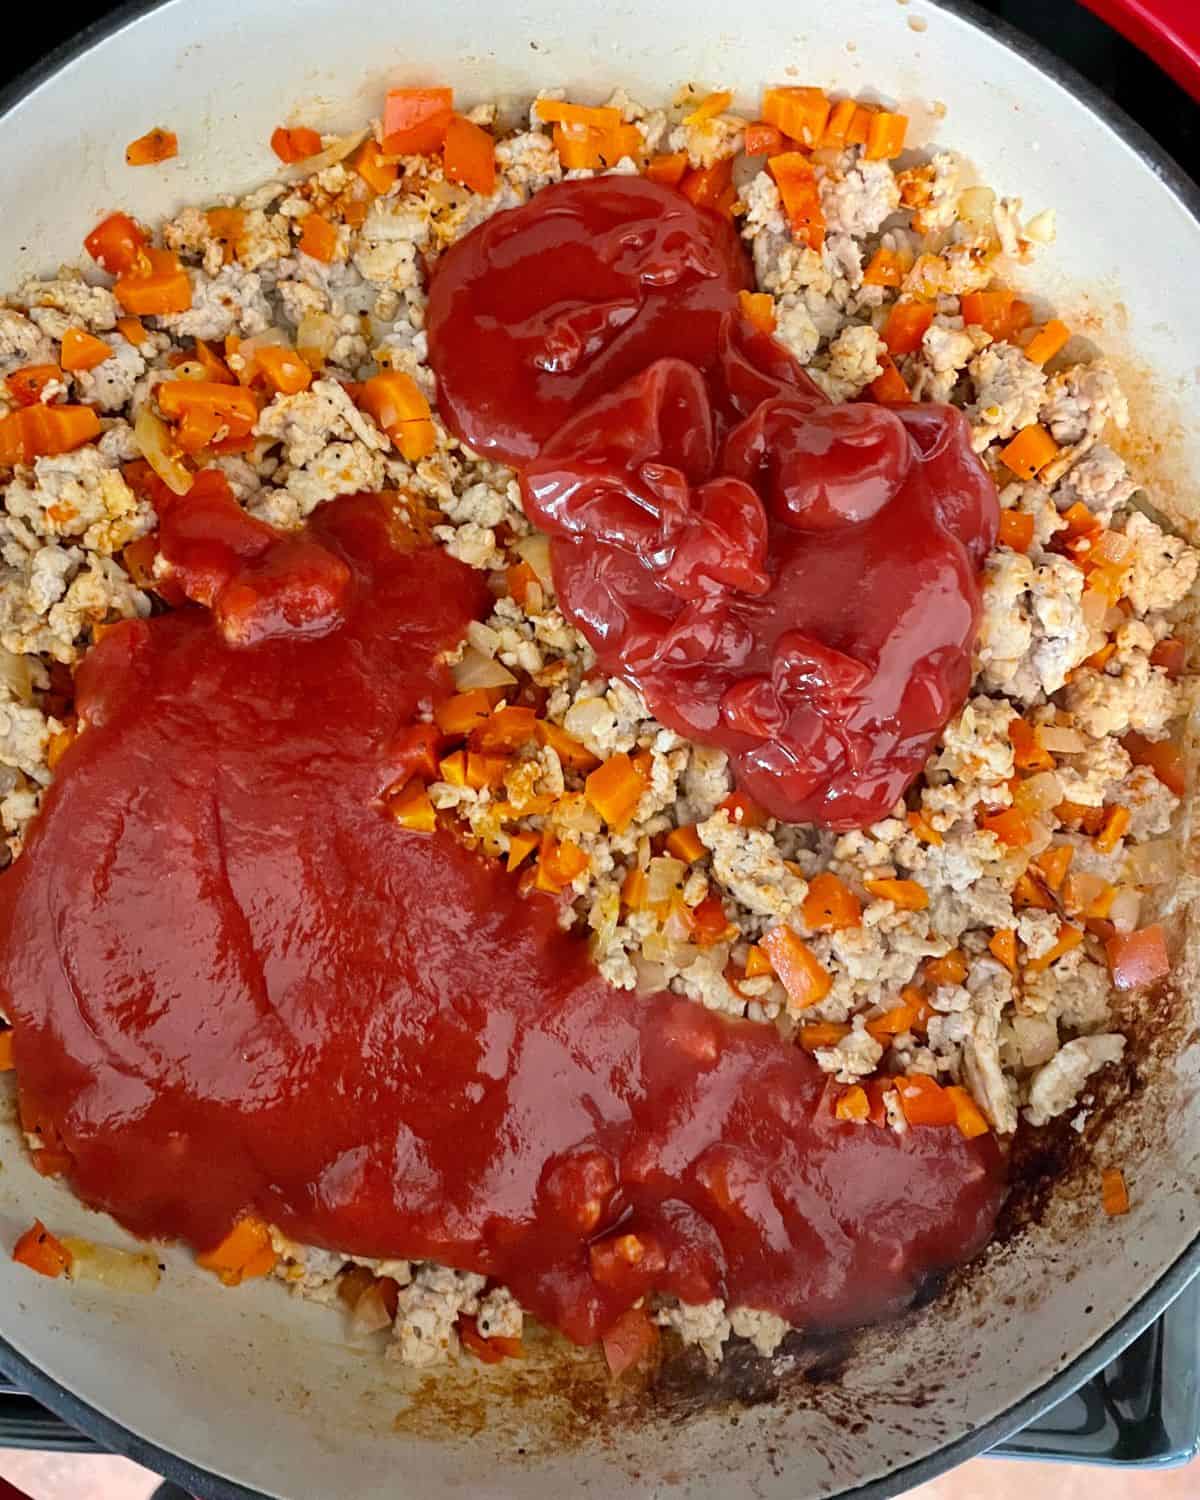 Tomato sauce, ketchup, Worcestershire sauce, and apple cider vinegar added to the pan.